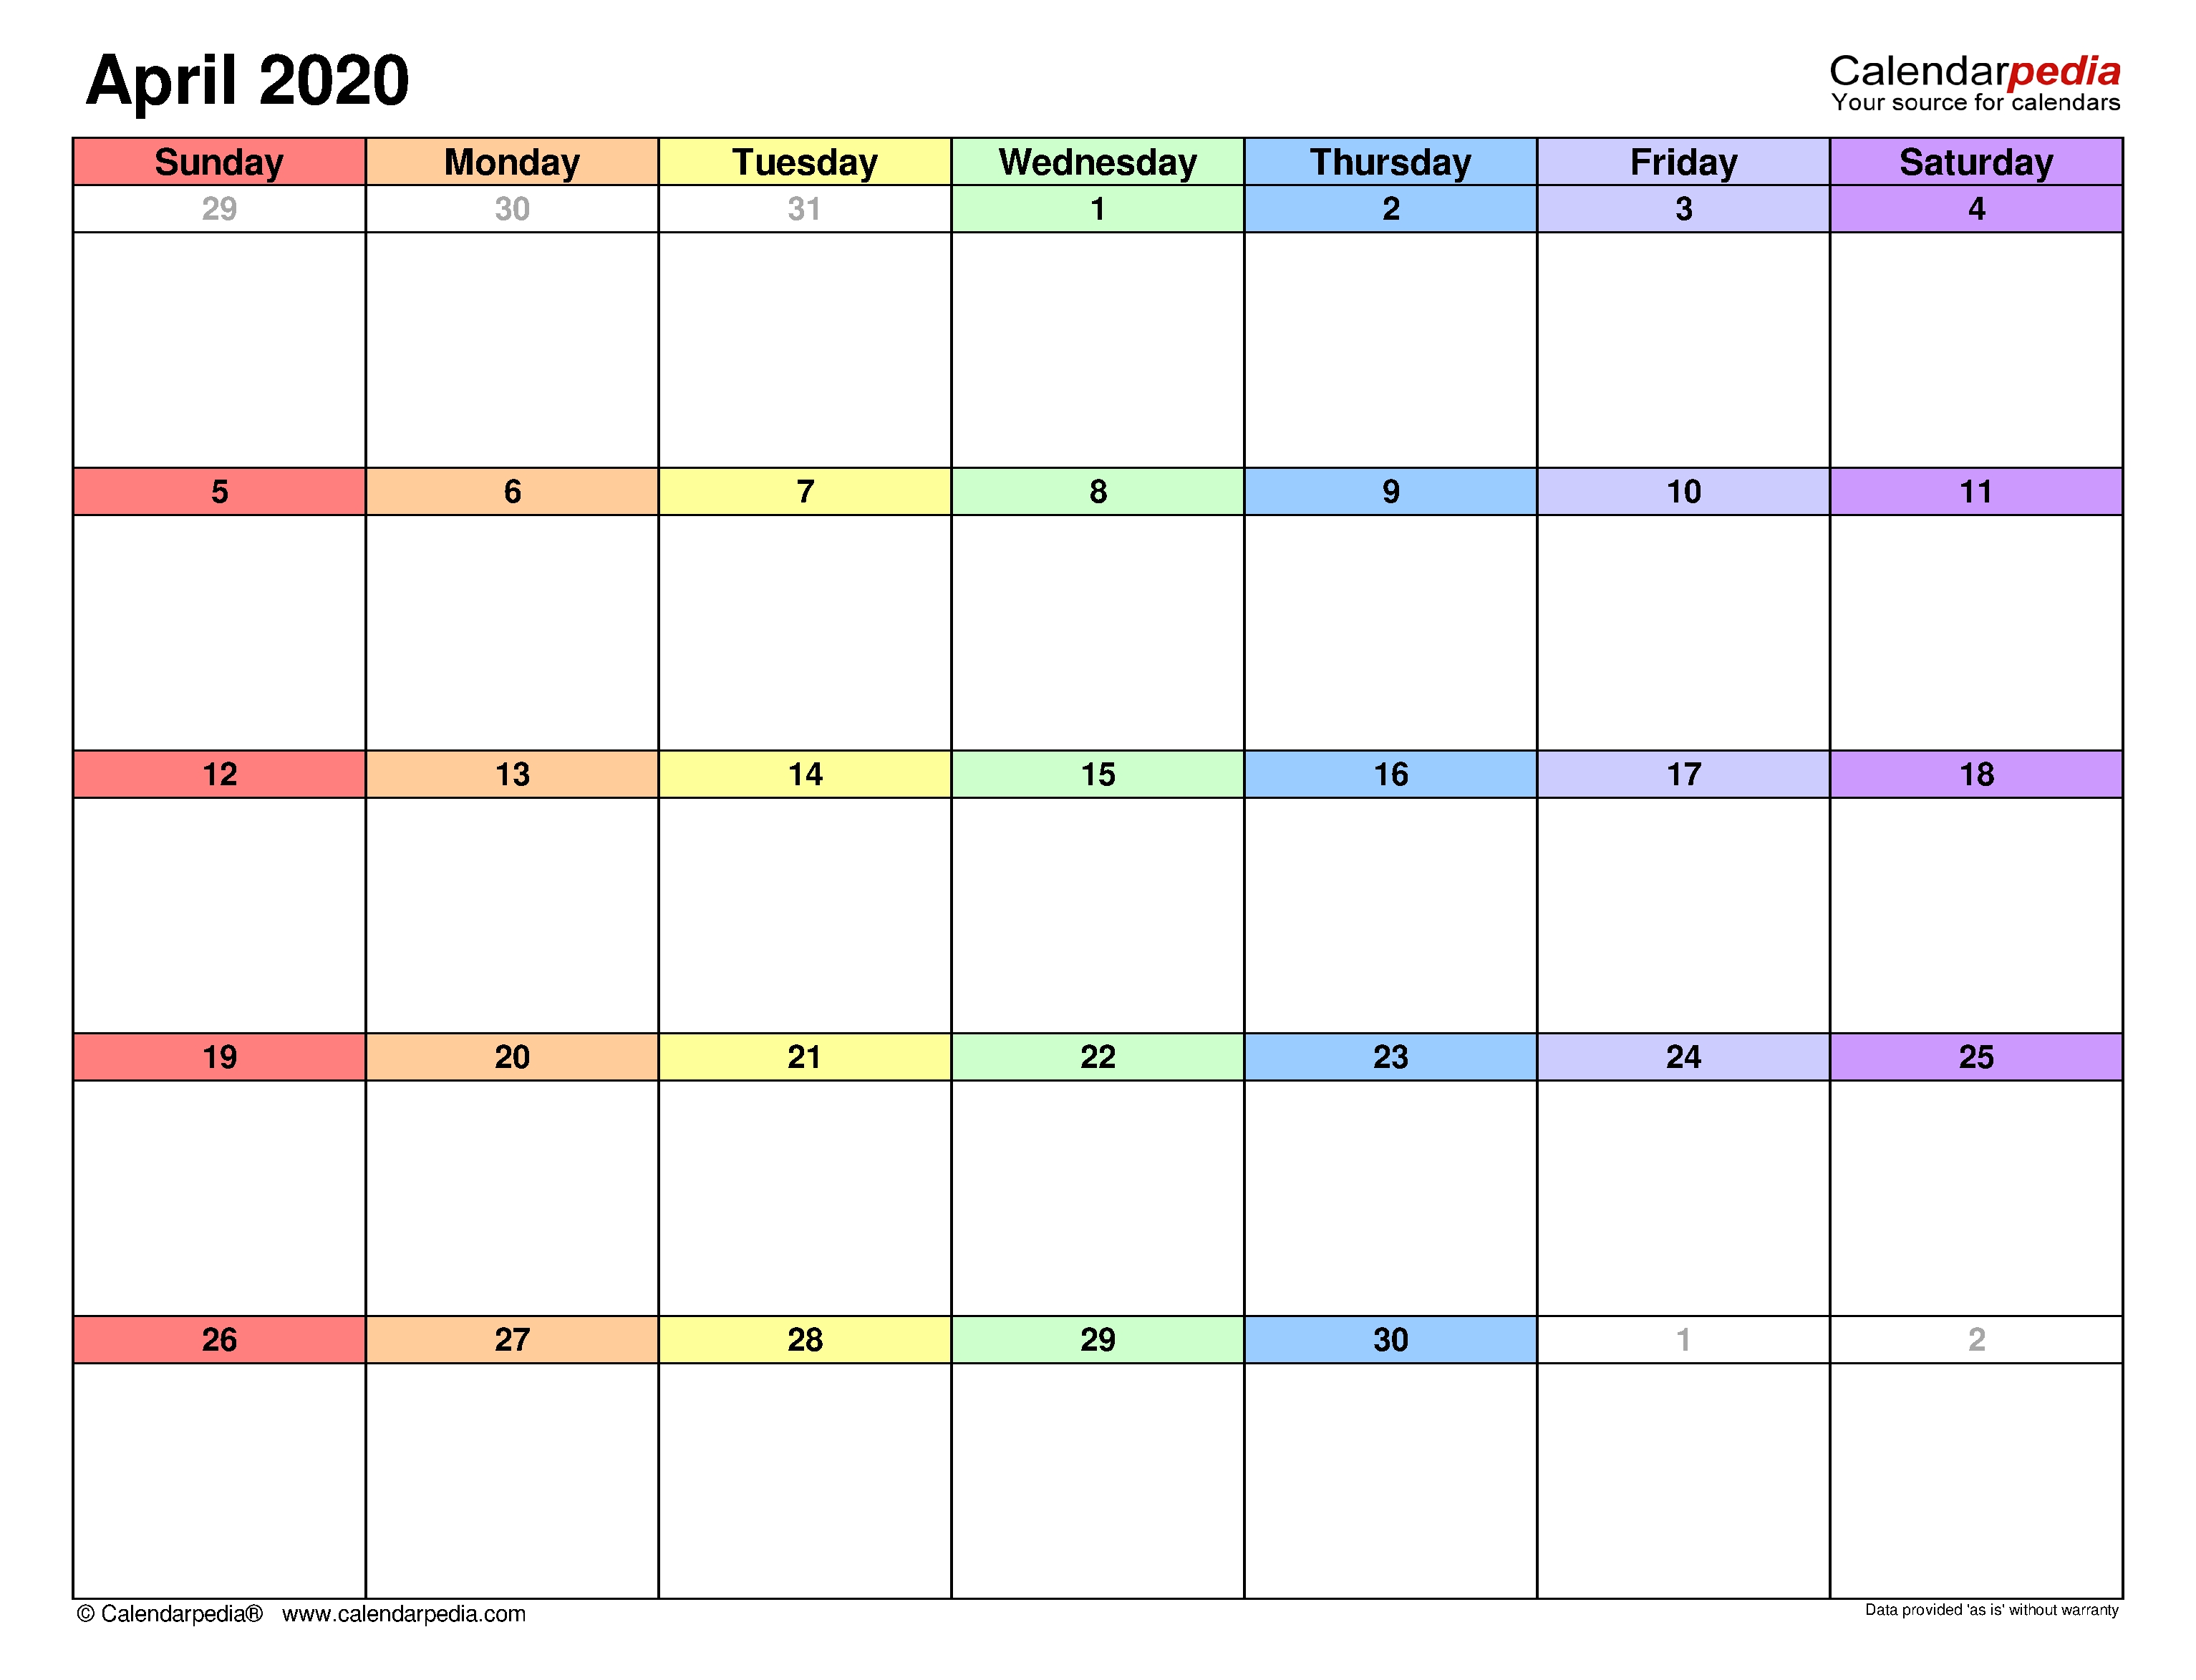 April 2020 - Calendar Templates For Word, Excel And Pdf